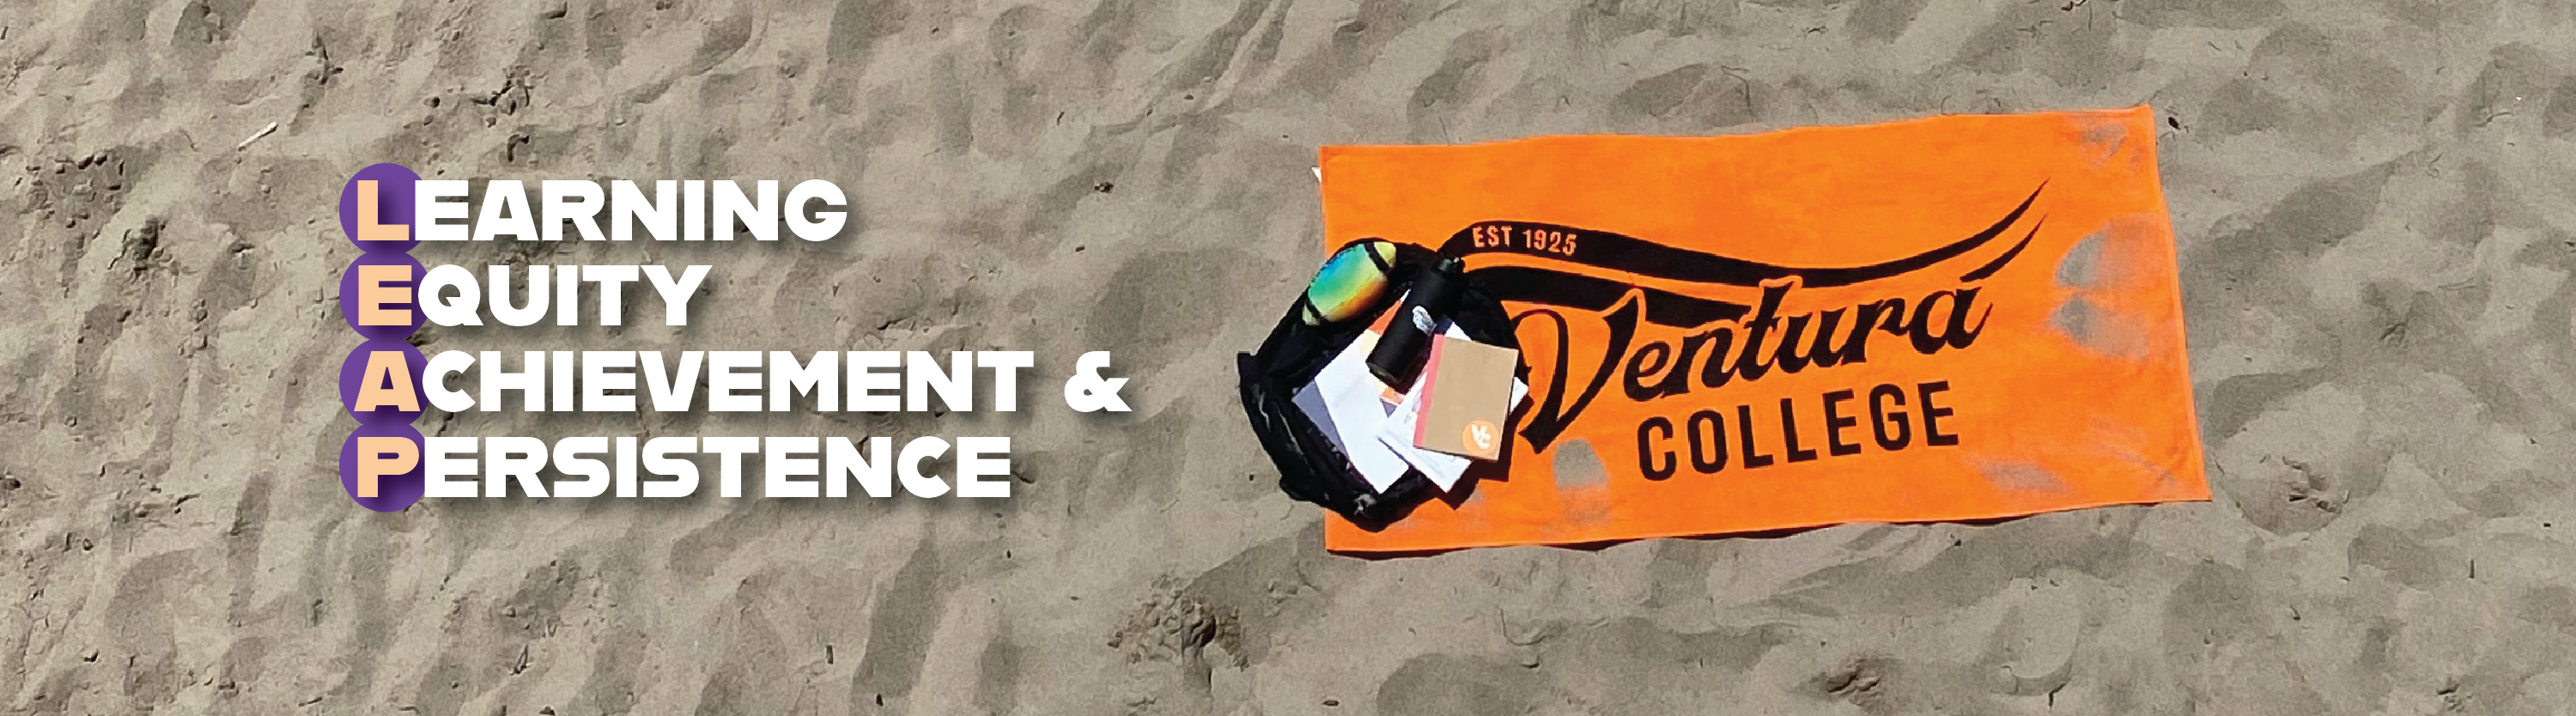 learning equity achievement and persistence with photo of a beach towel with vc logo